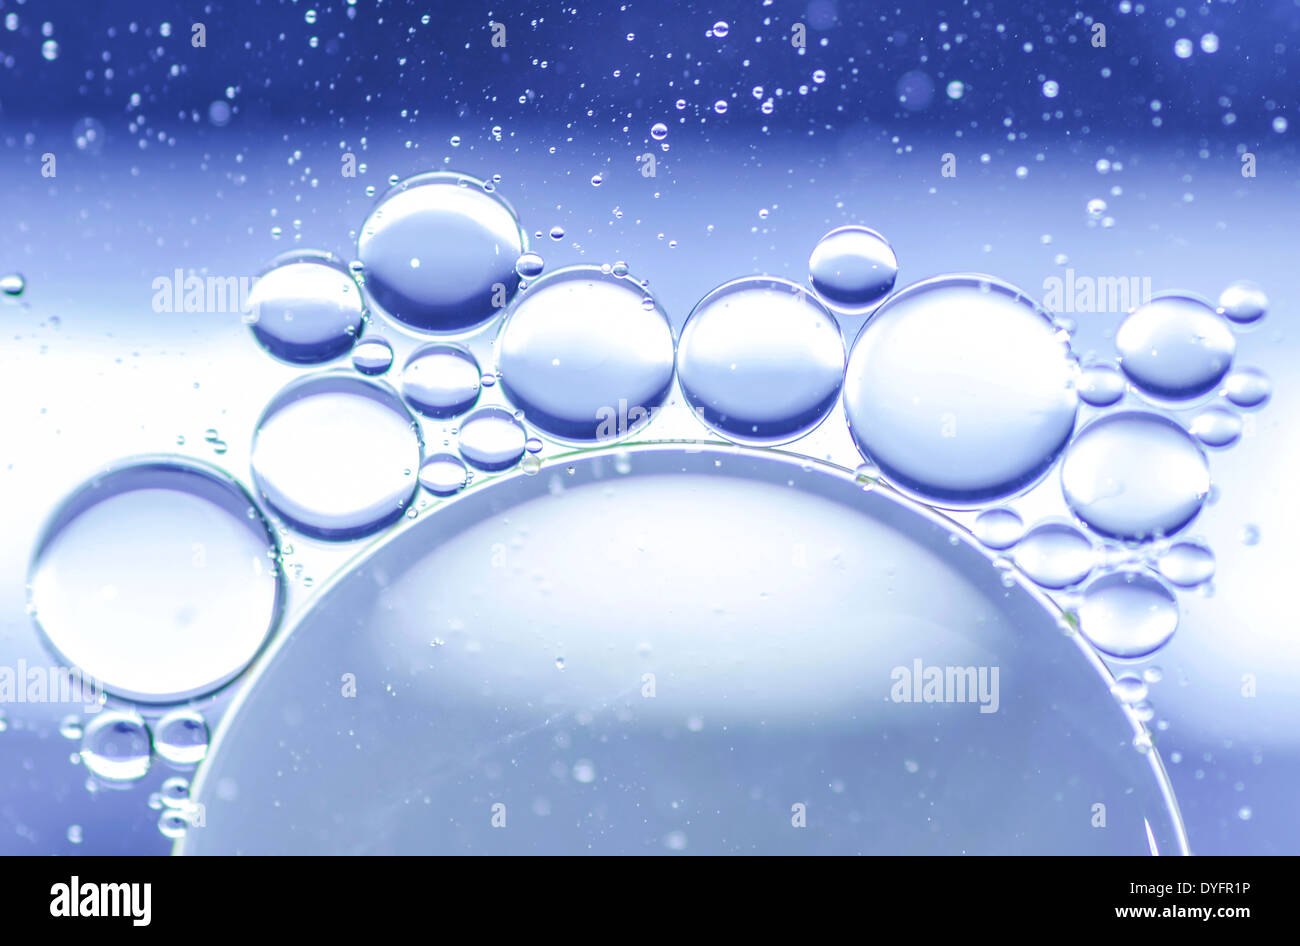 Abstract Blue Water Bubbles Stock Photo